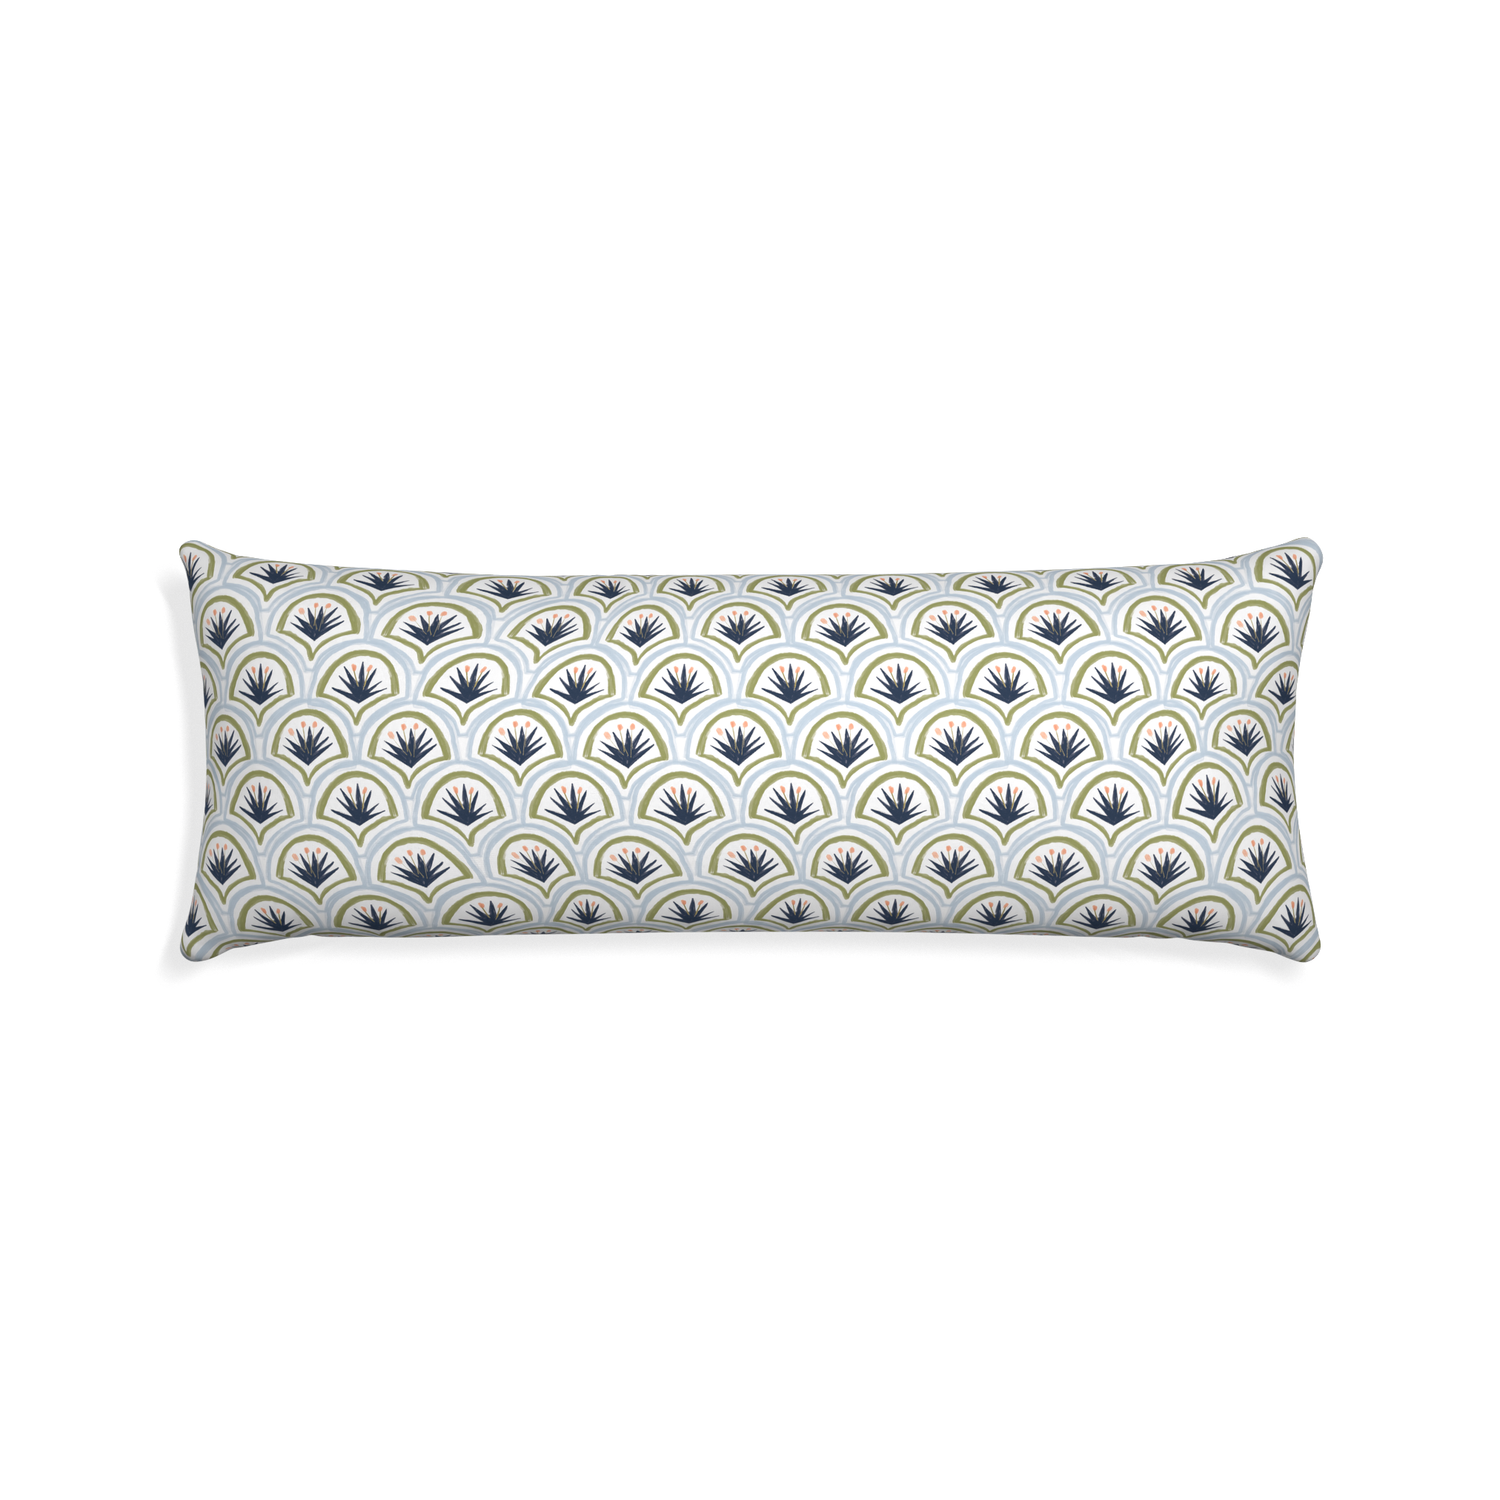 Xl-lumbar thatcher midnight custom art deco palm patternpillow with none on white background